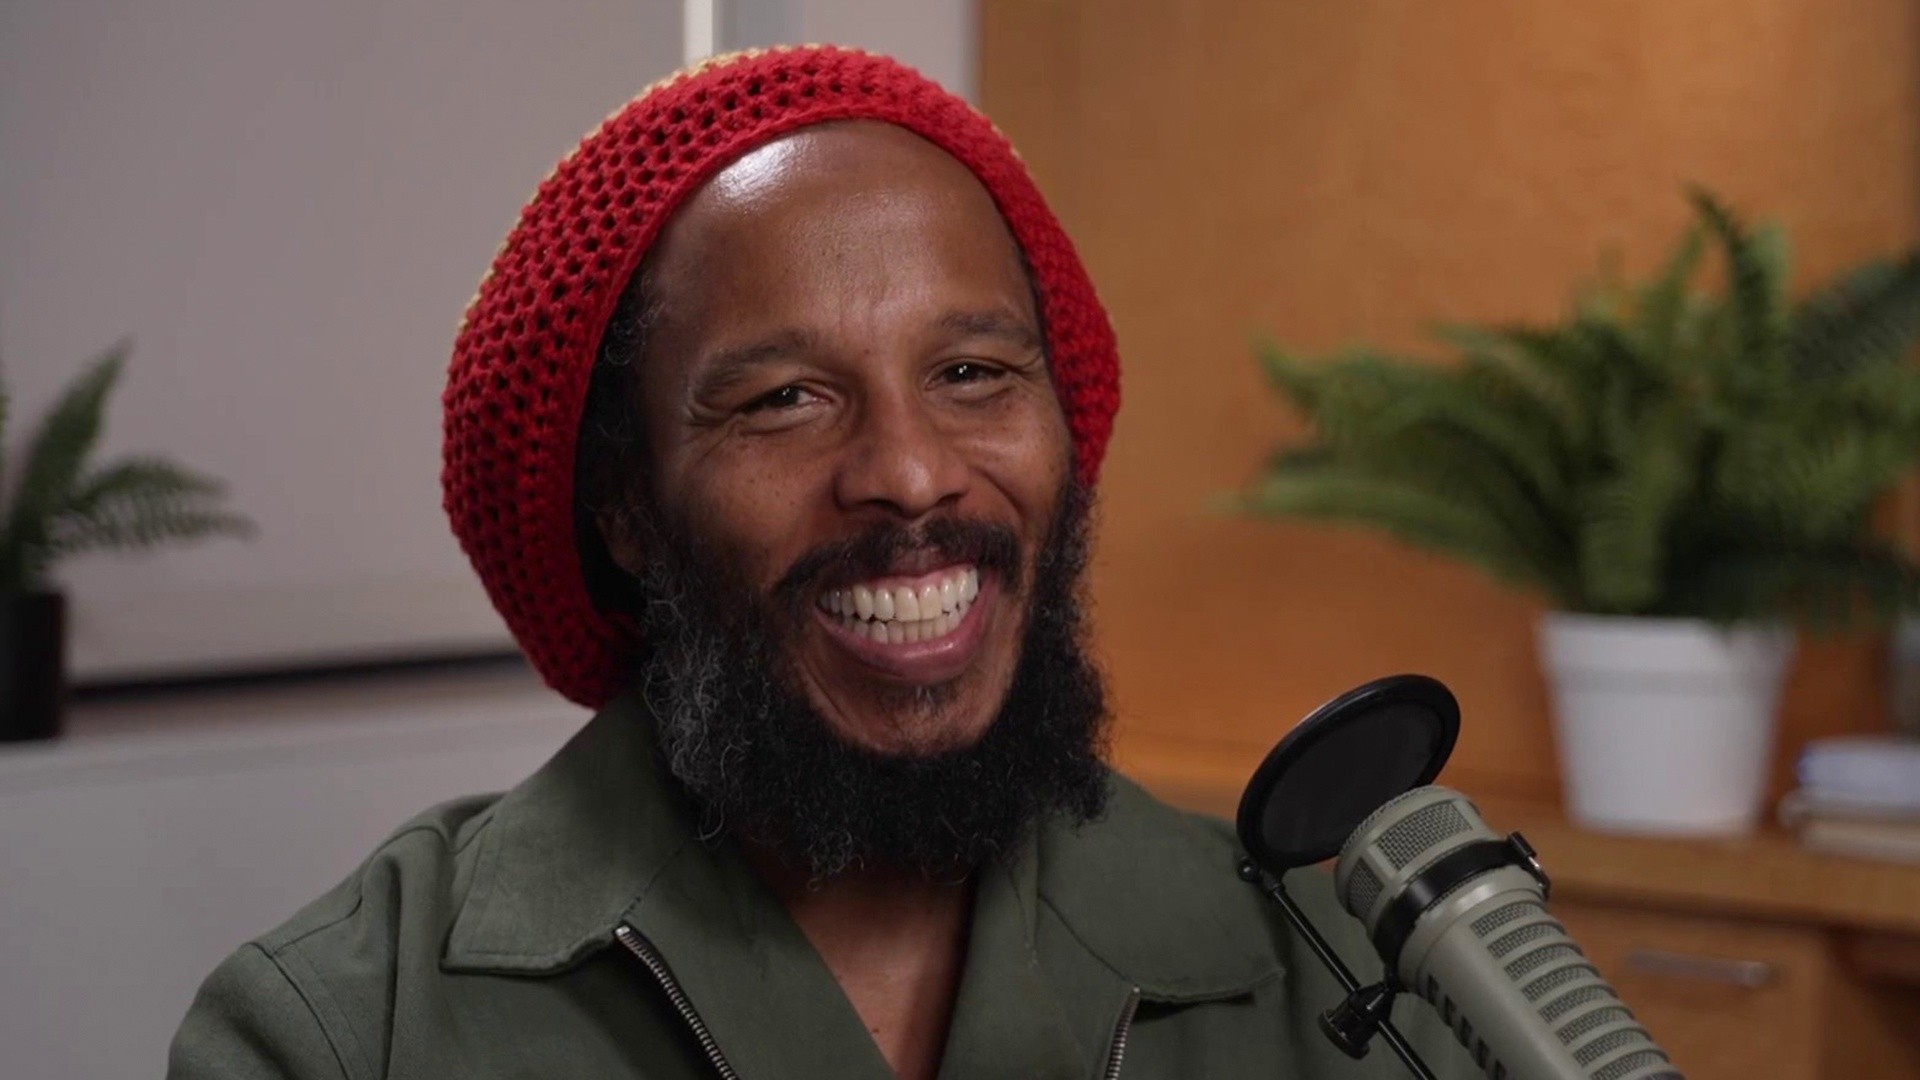 Hoda Kotb sits down with Ziggy Marley in new podcast episode